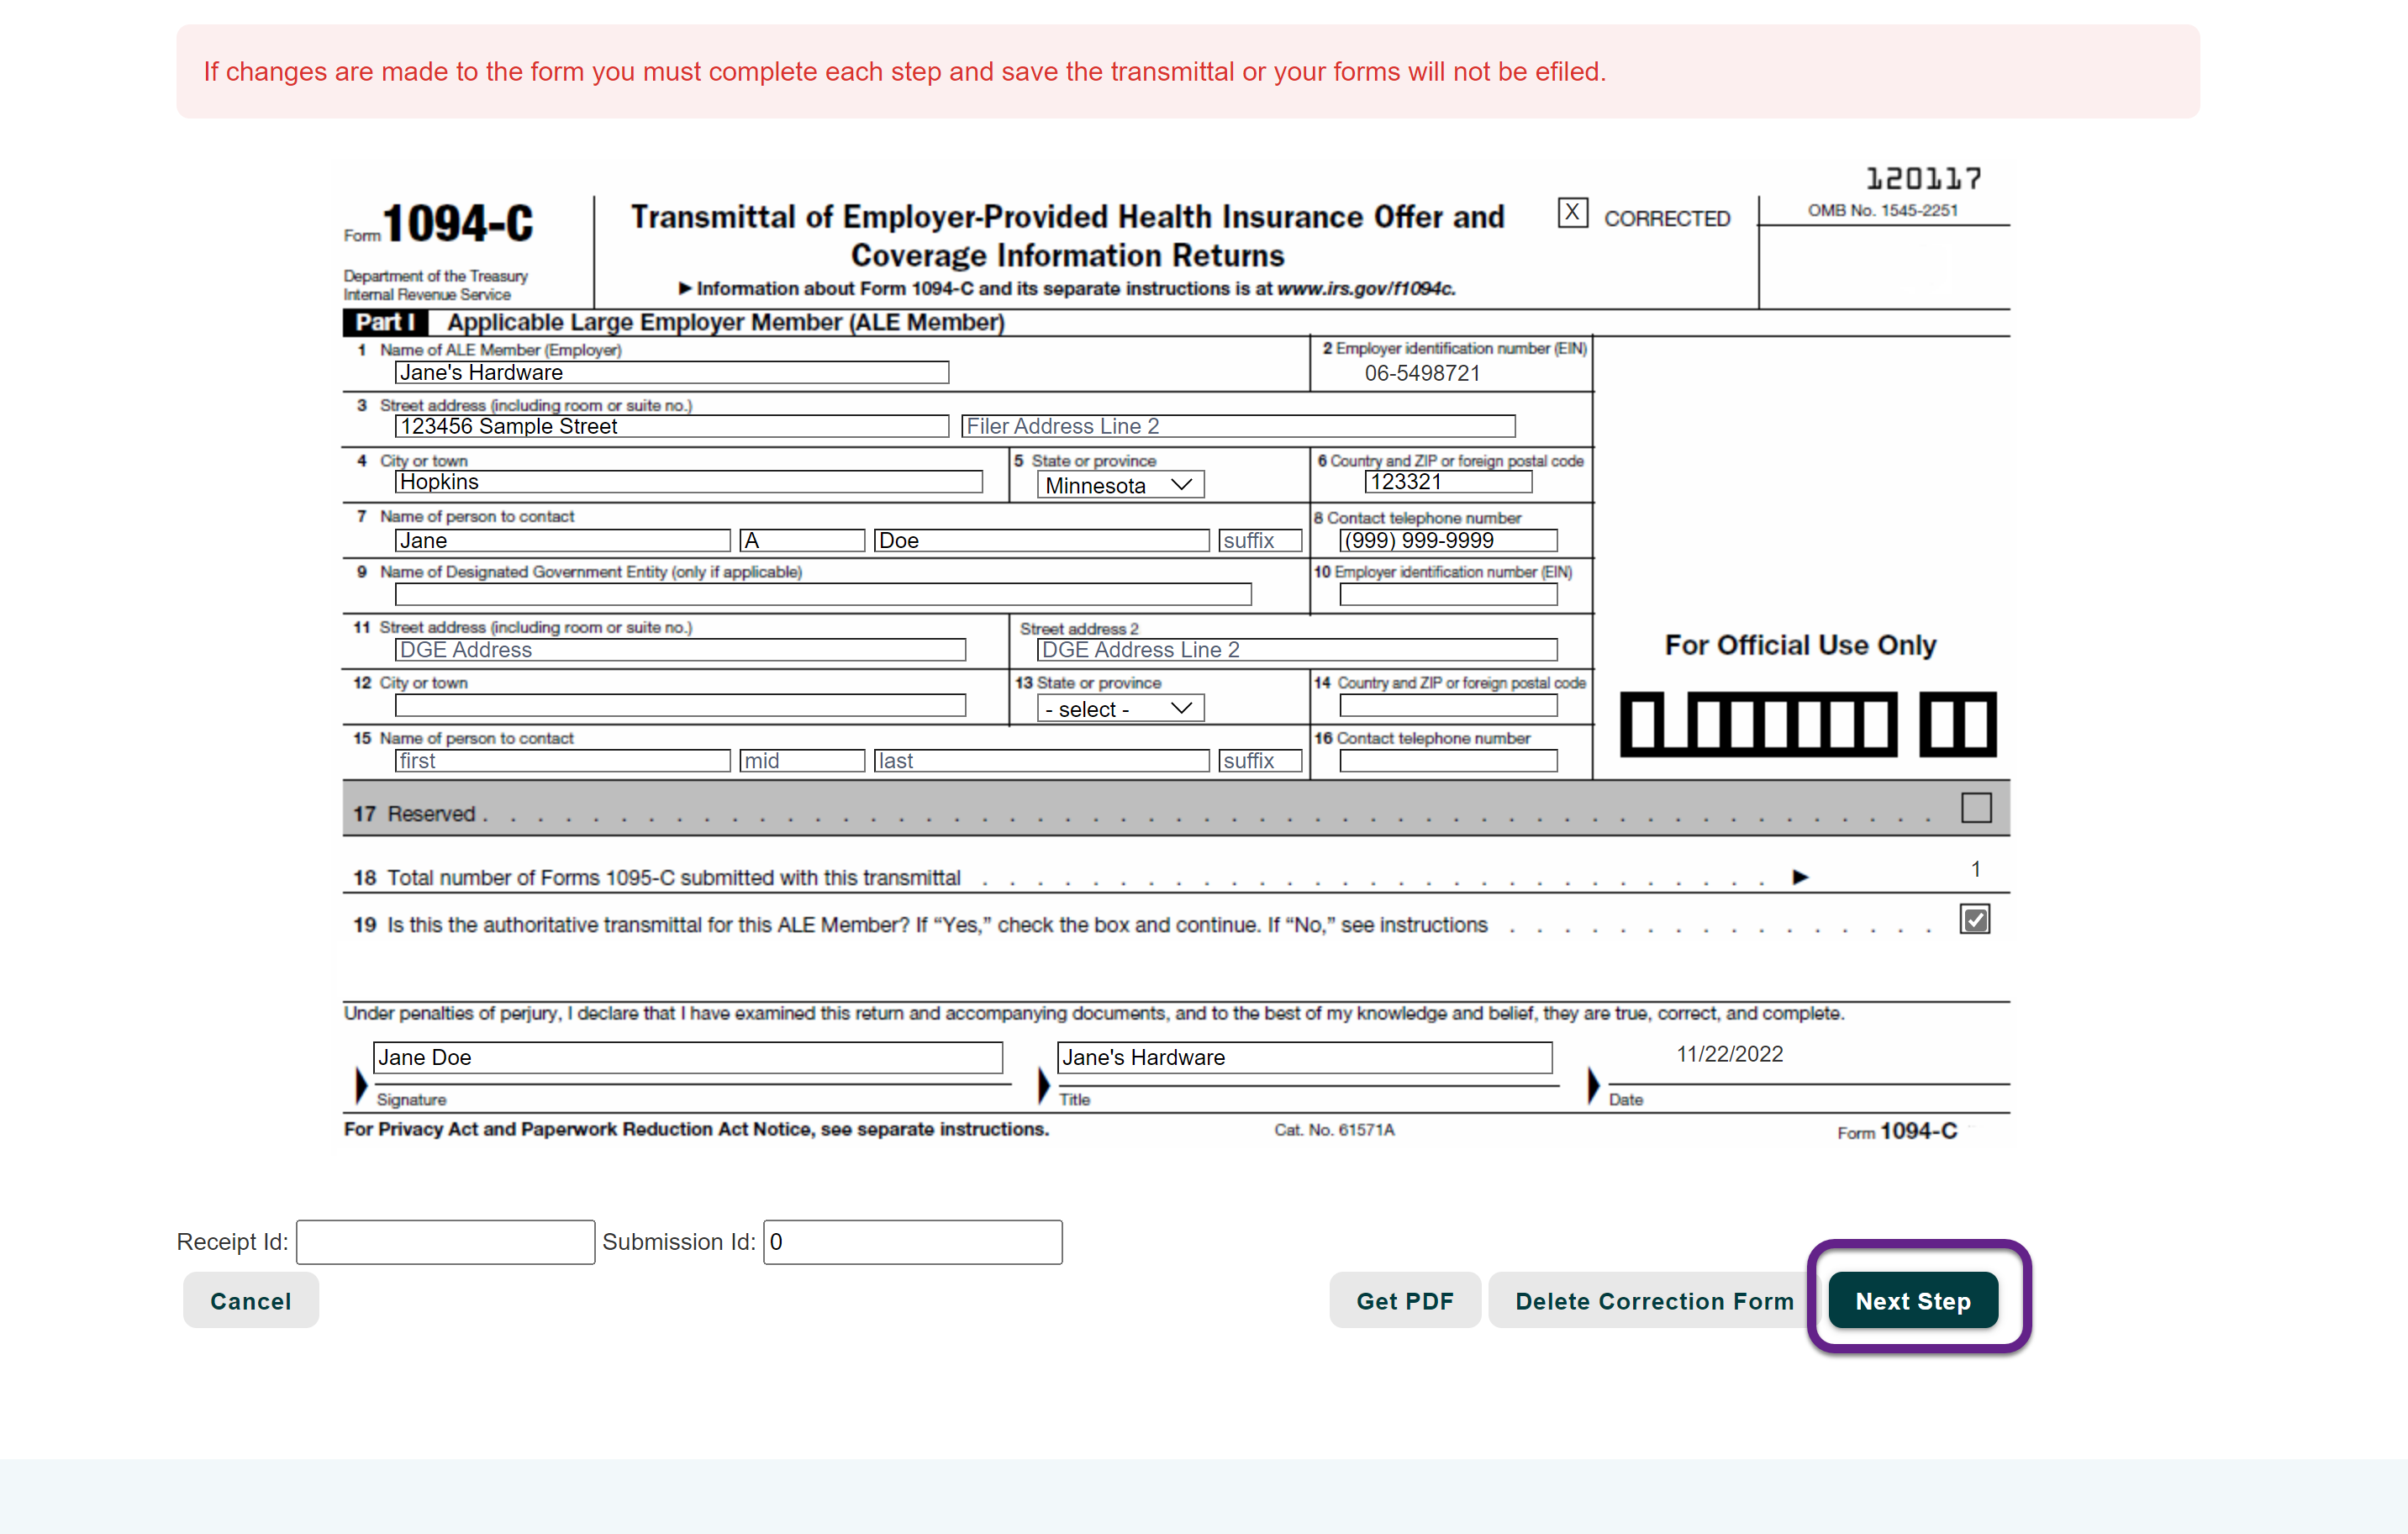 Image of a 1094-C form with a callout on the Next Step button.